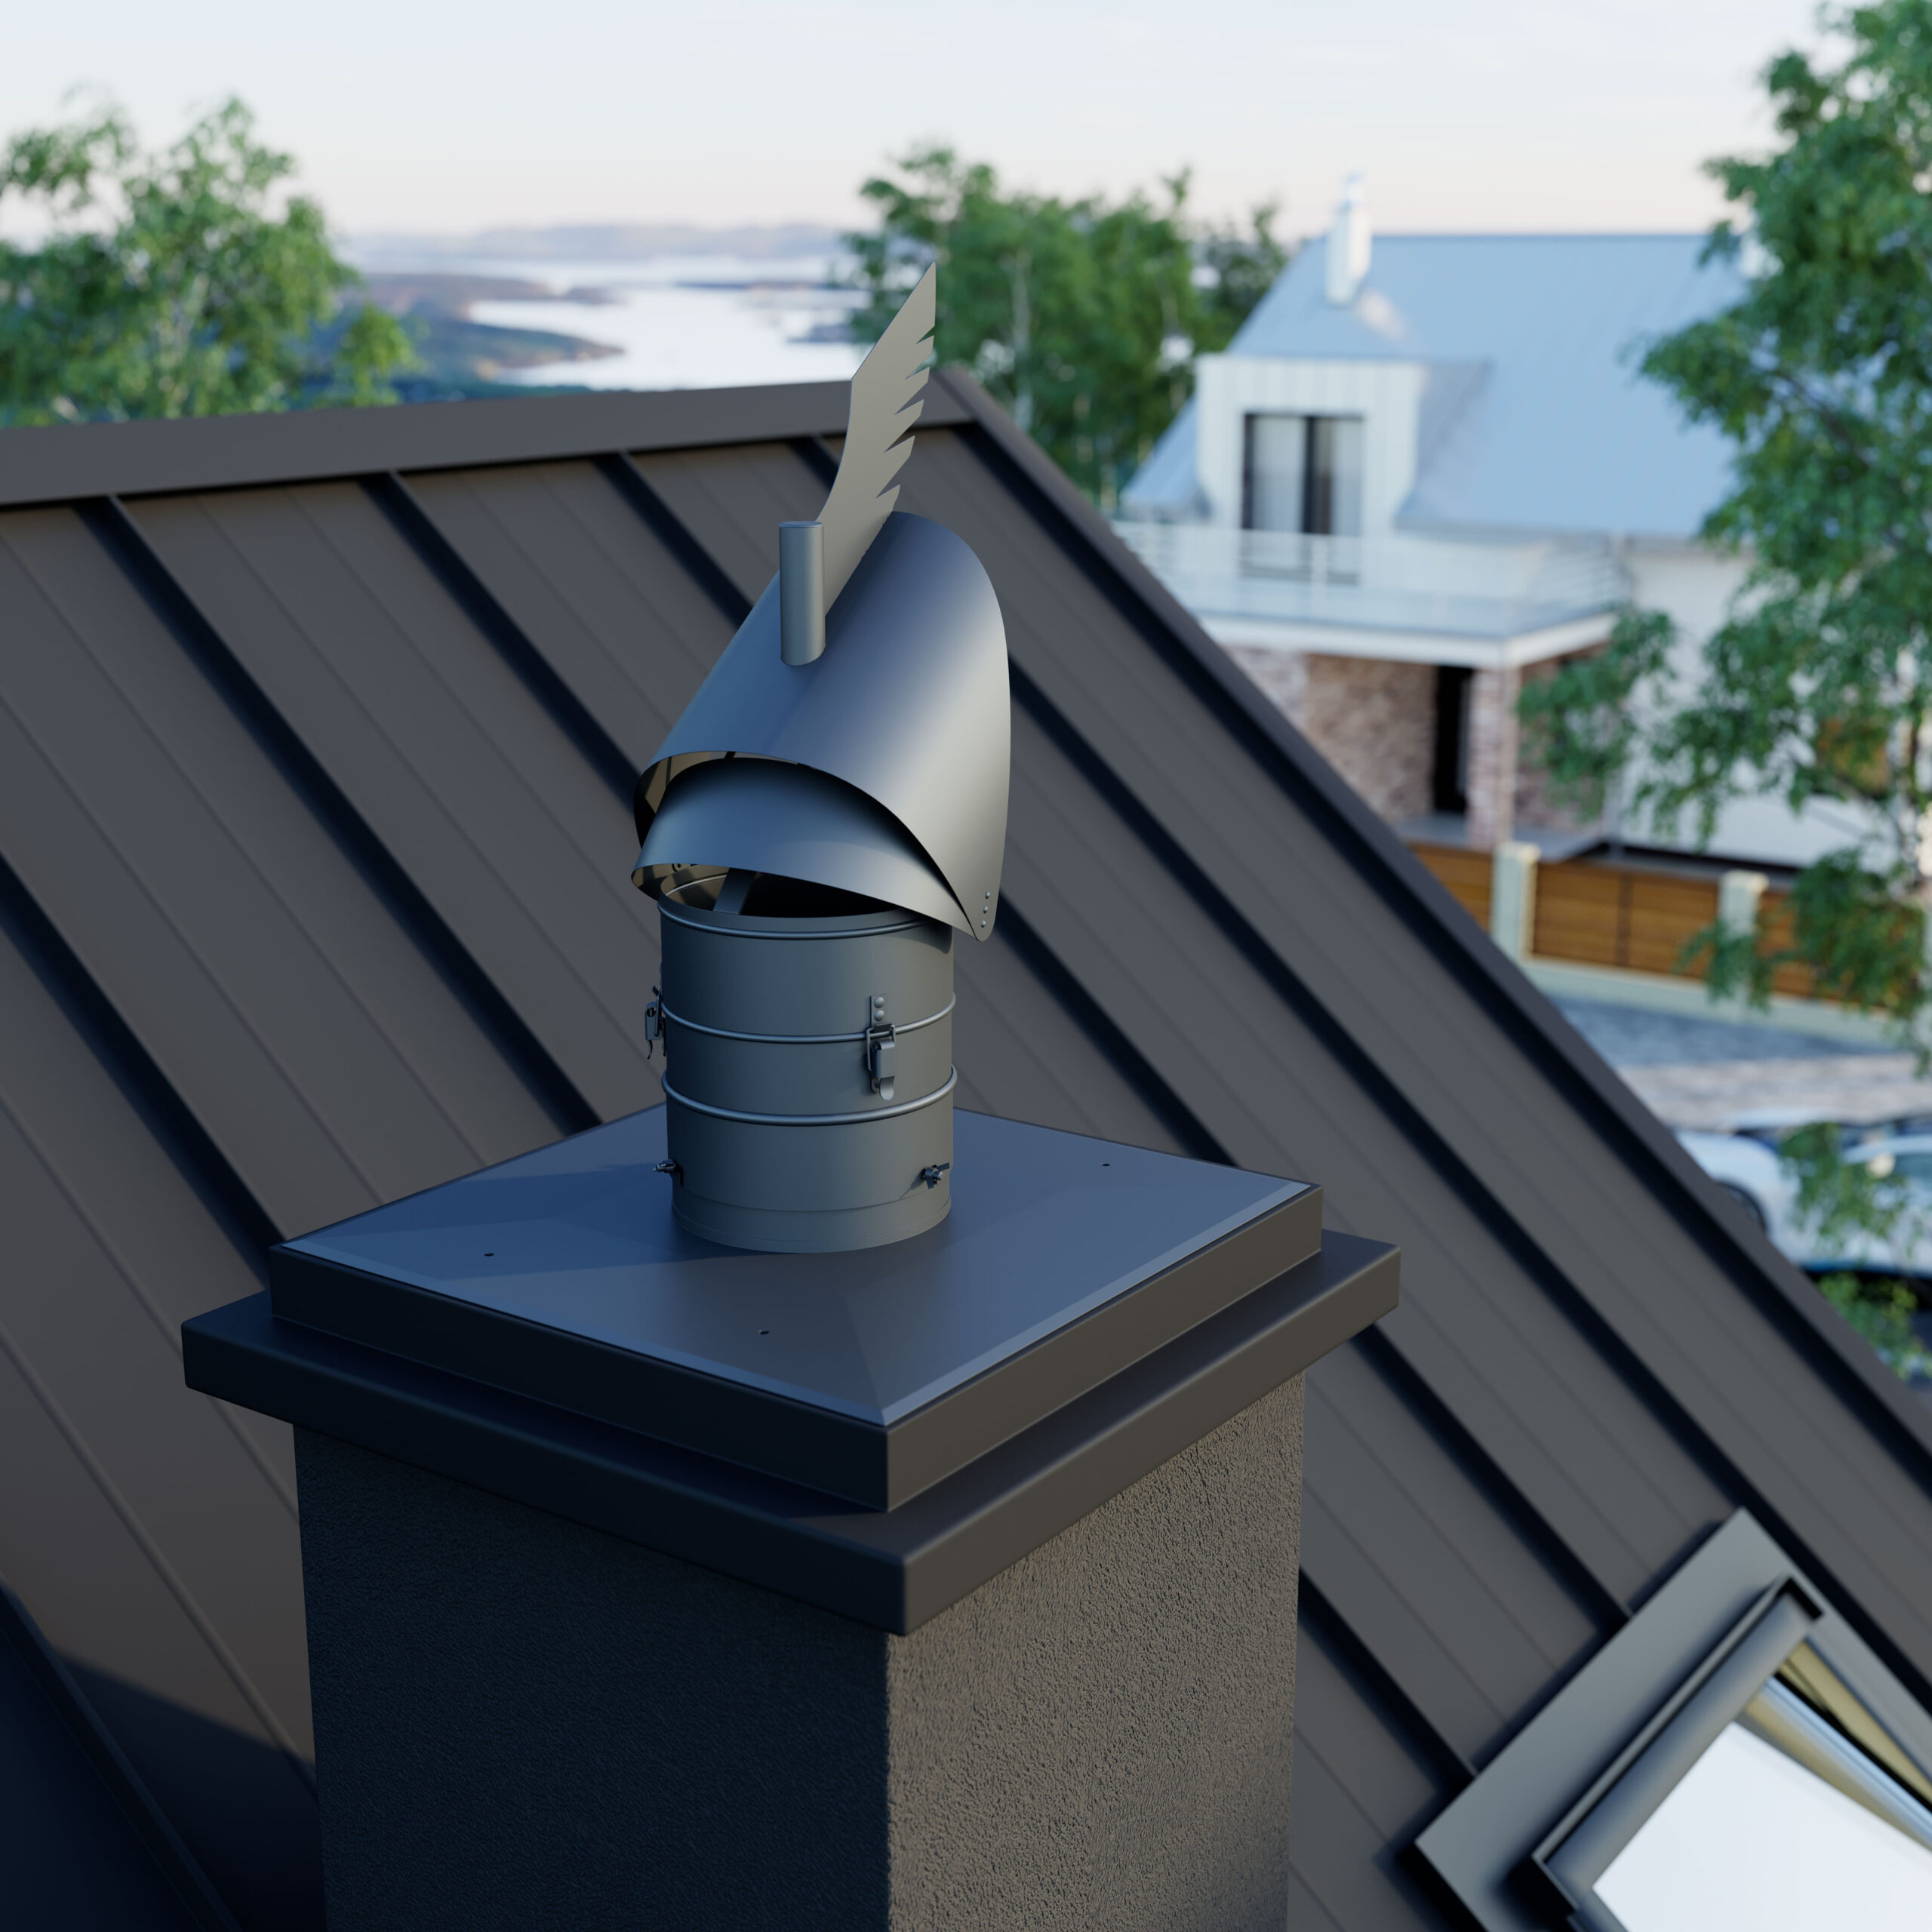 detailed steel chimney on the roof